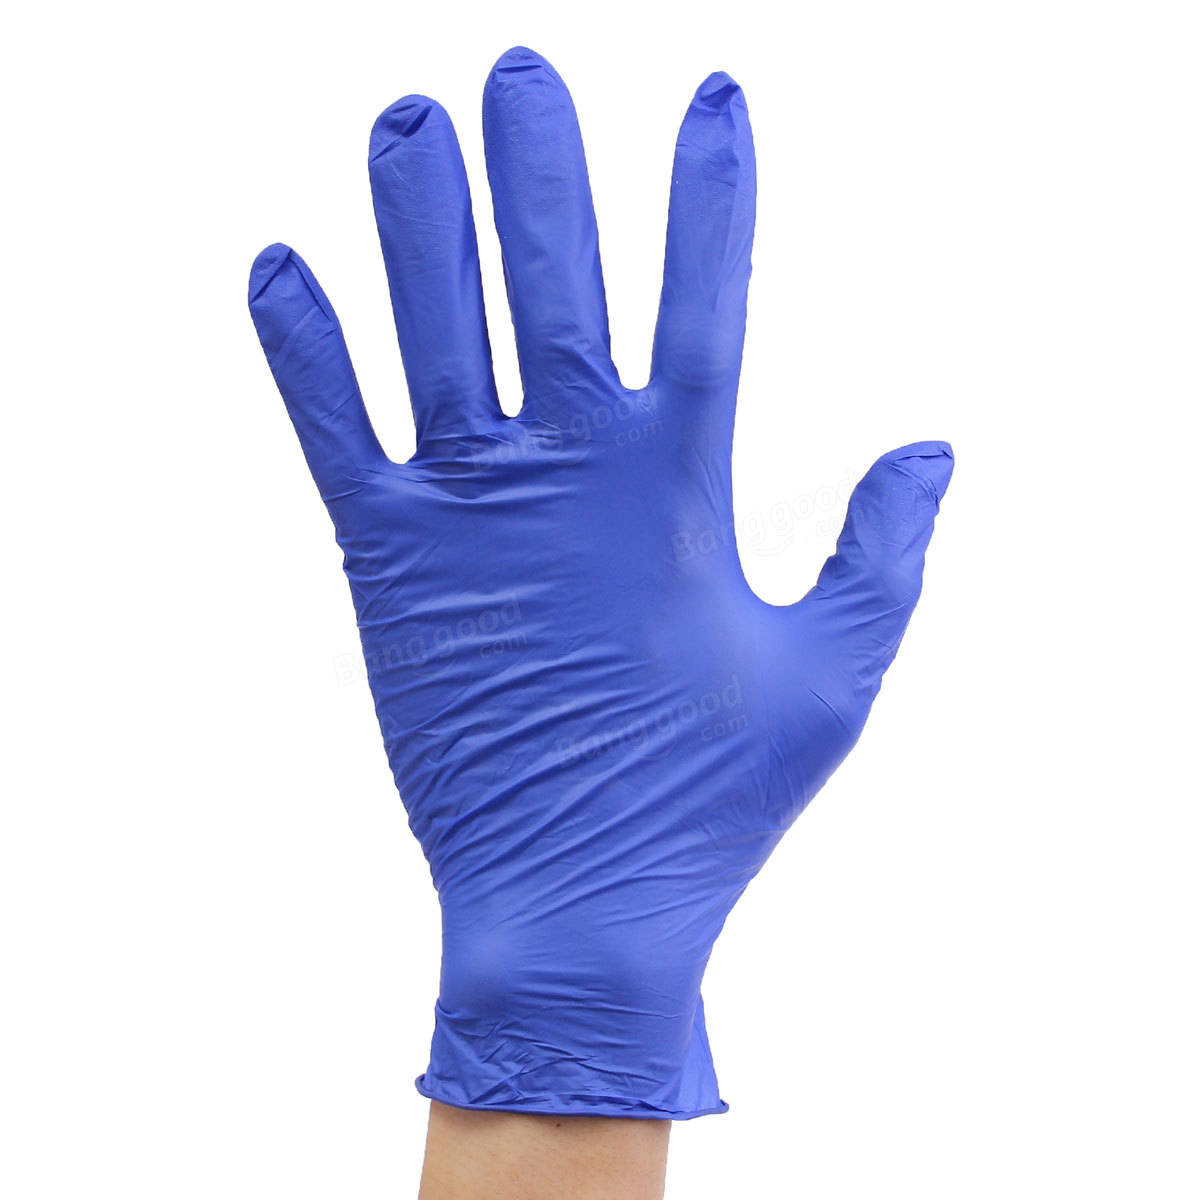 Rubber Glove Markets in Asia to 2020 - Market Size, Development, and Forecasts